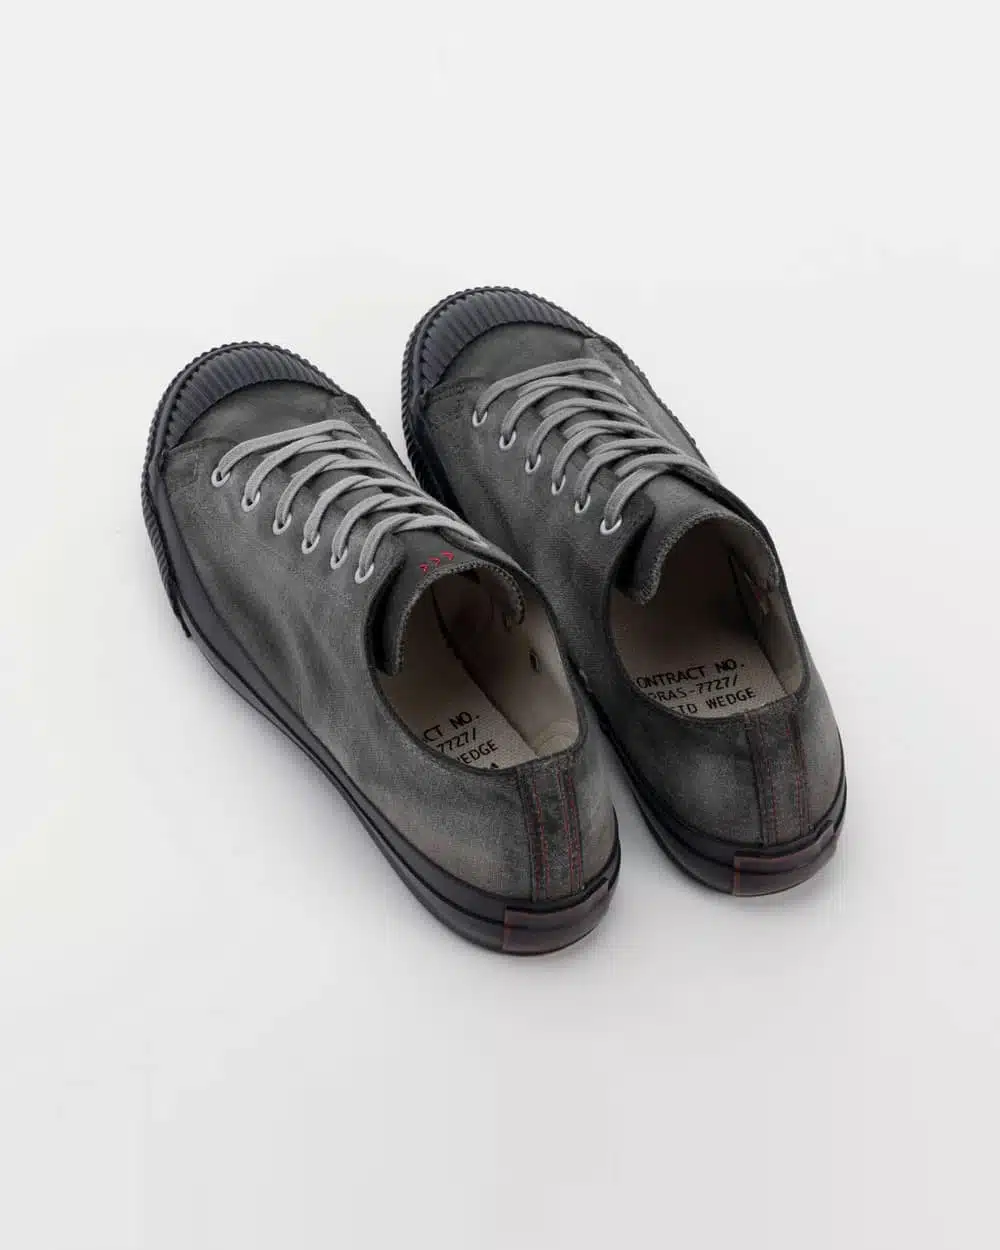 PRAS Shellcap Low Sneakers - Sumi Hand Dyed